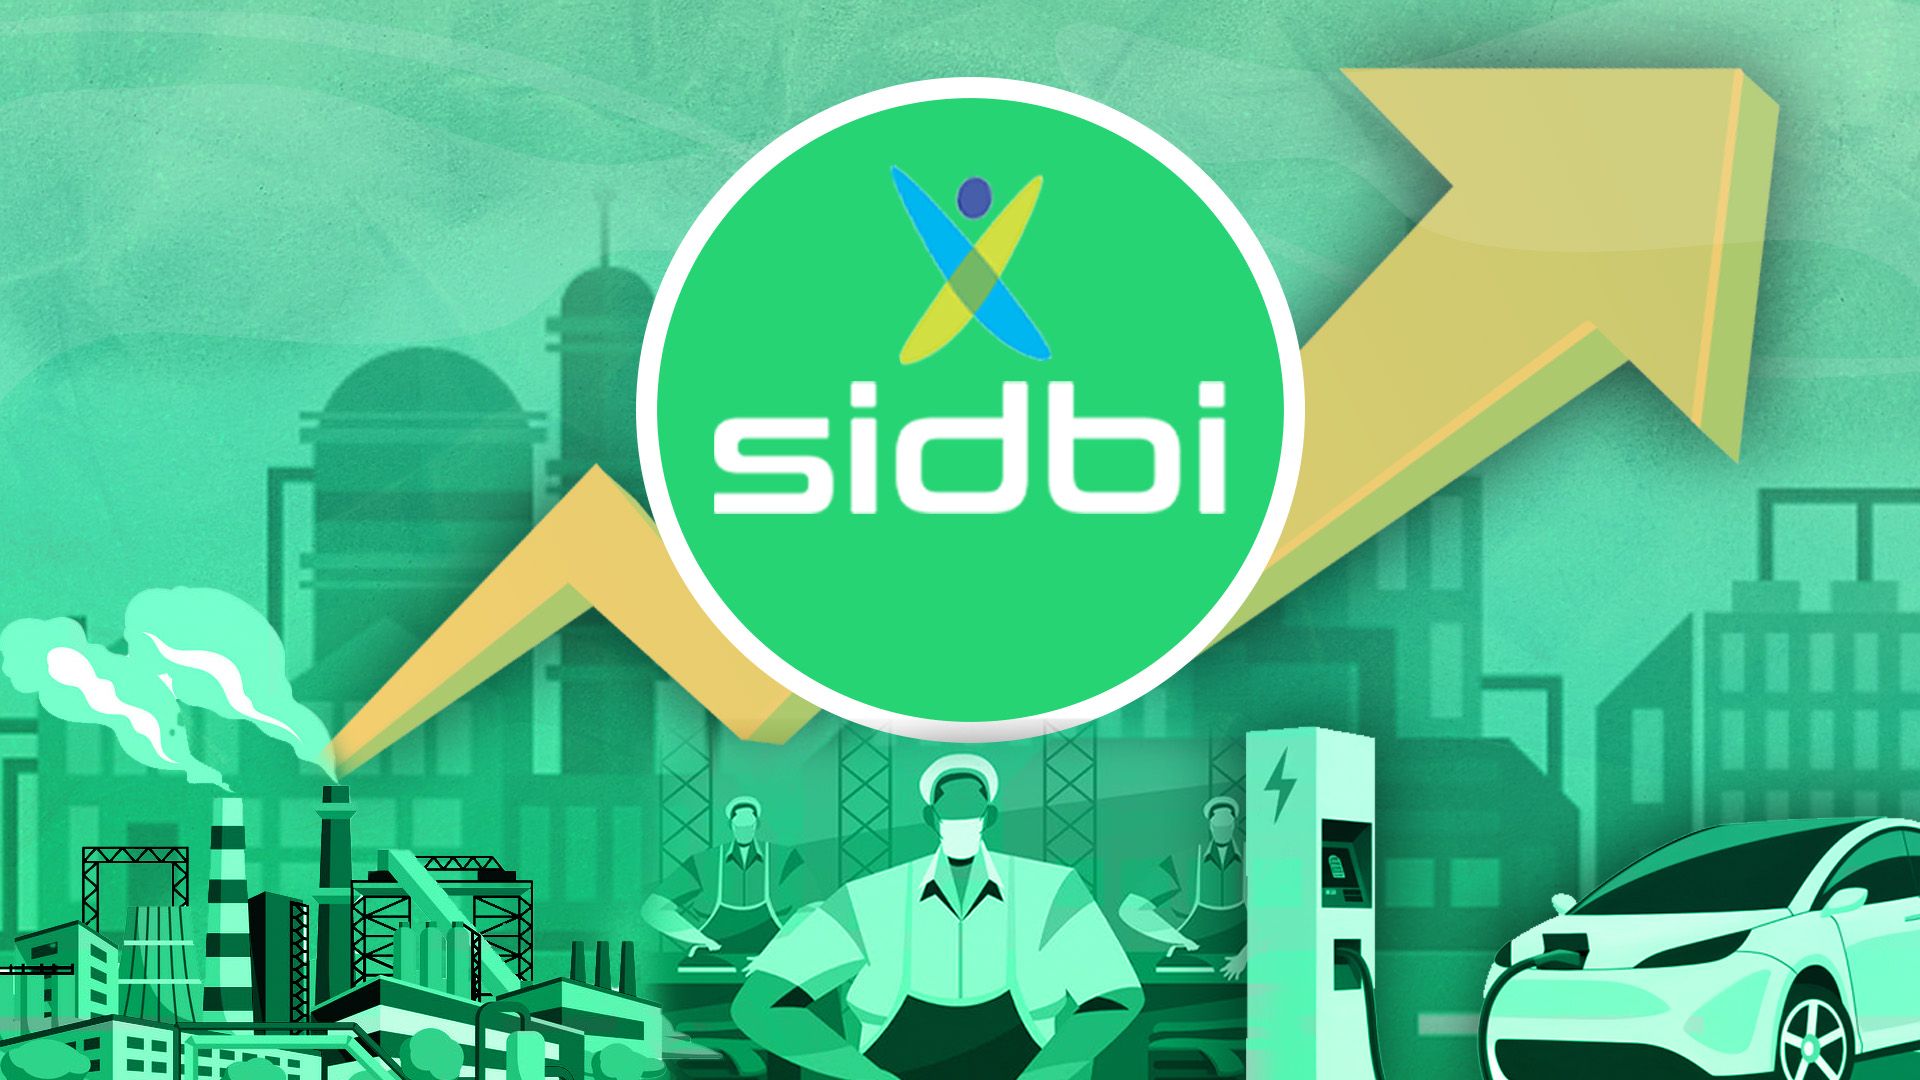 Investing in a greener, inclusive India: SIDBI’s Chairman, Mr. Ramann reveals their plans